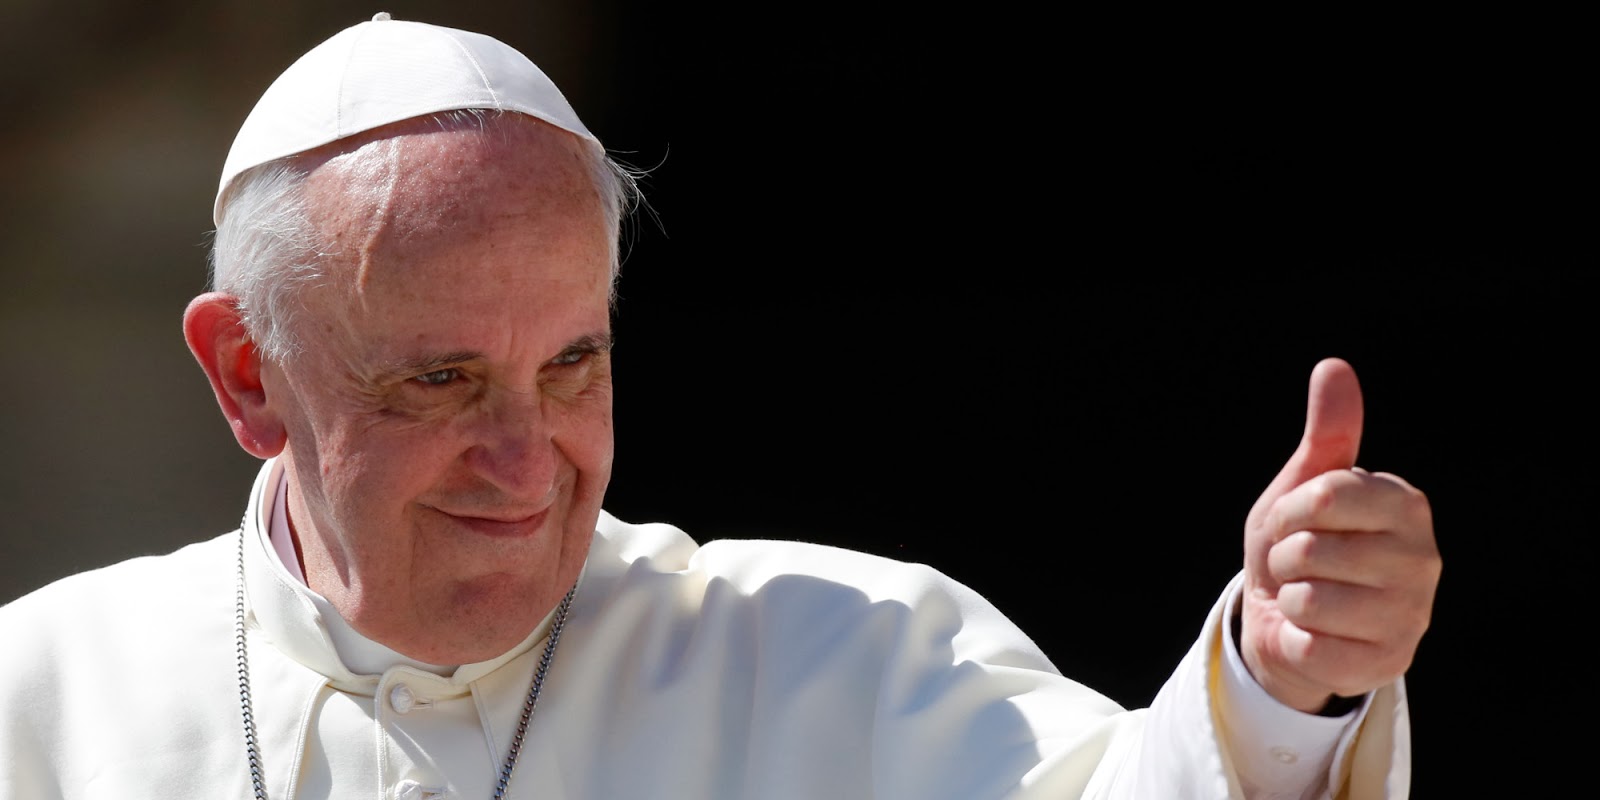 The Pope’s Five Economic Insights